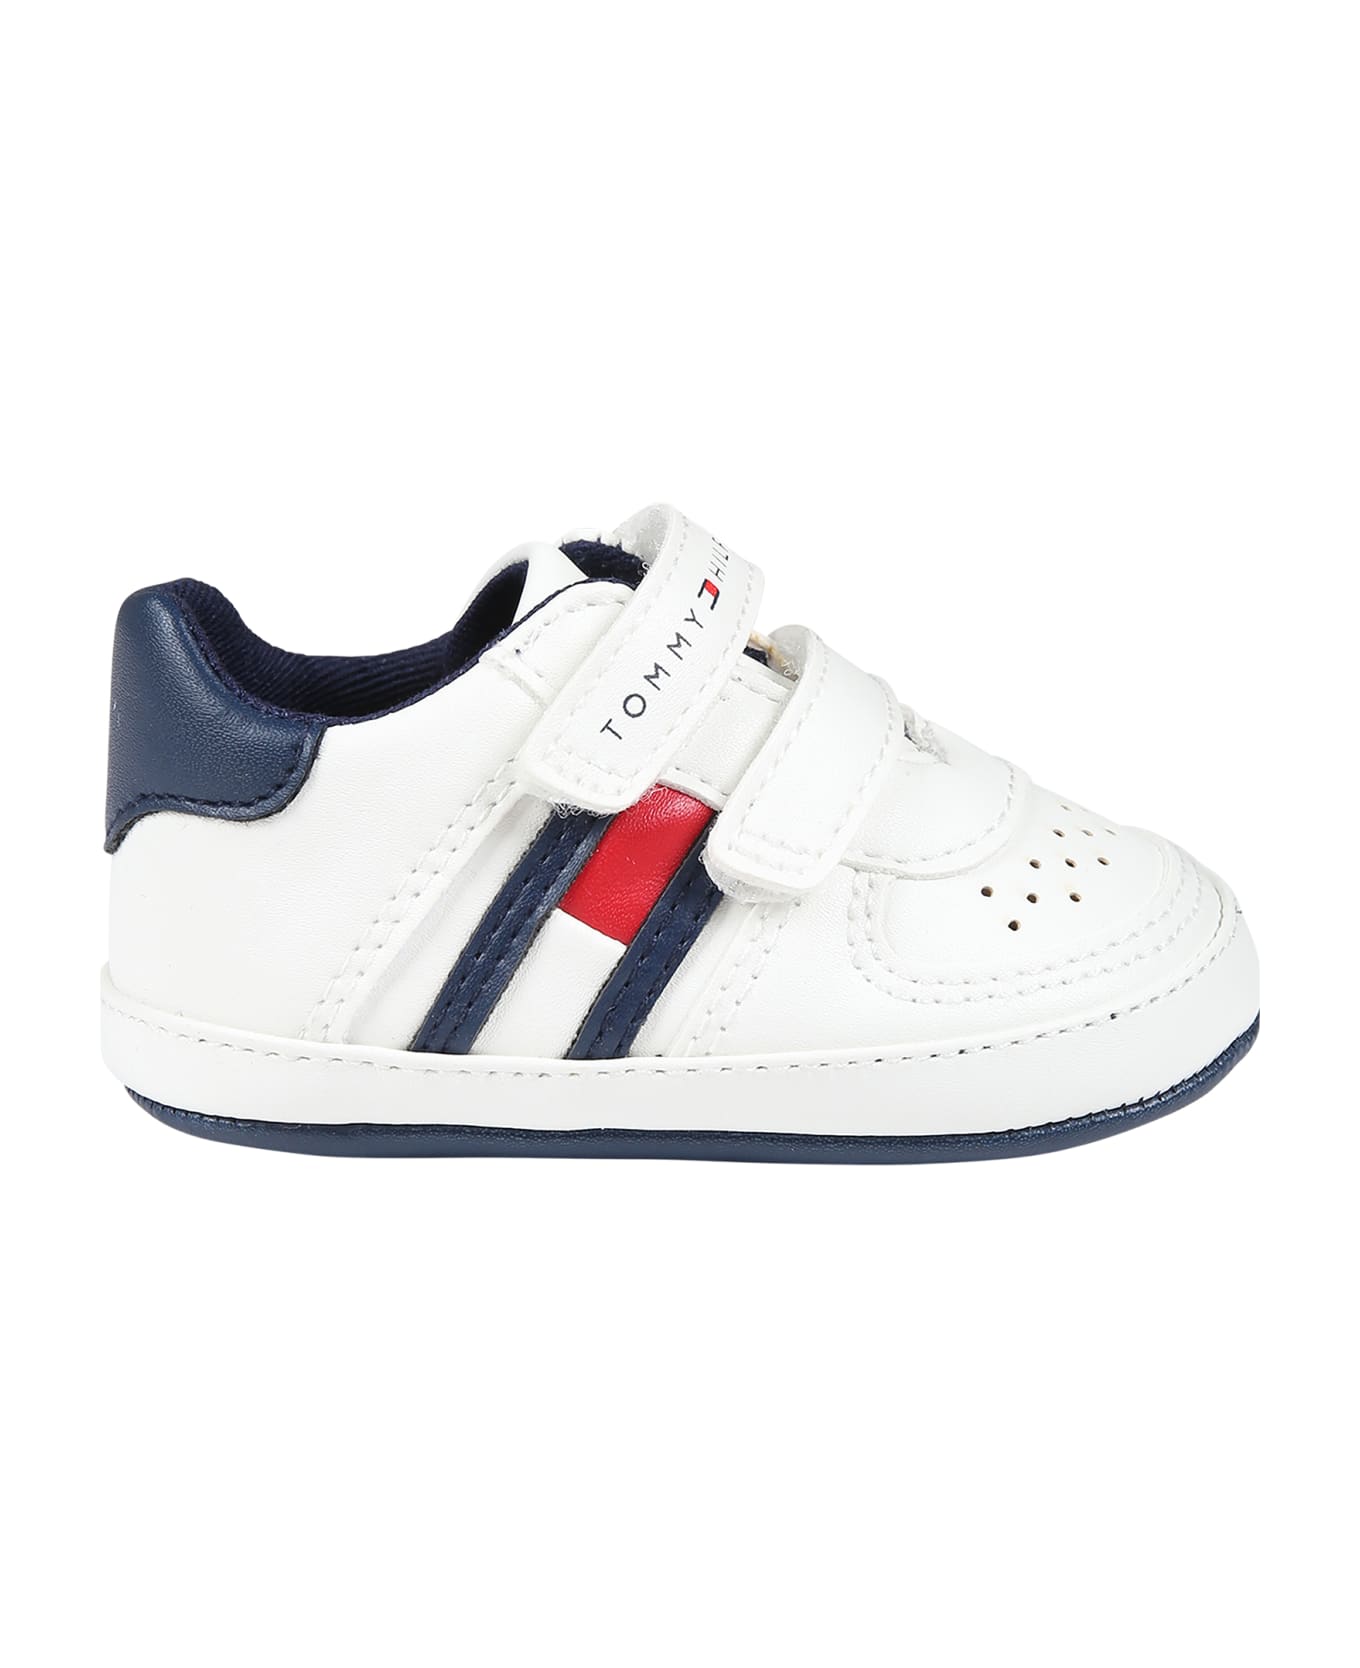 Tommy Hilfiger White Sneakers For Baby Boy With Logo - White シューズ